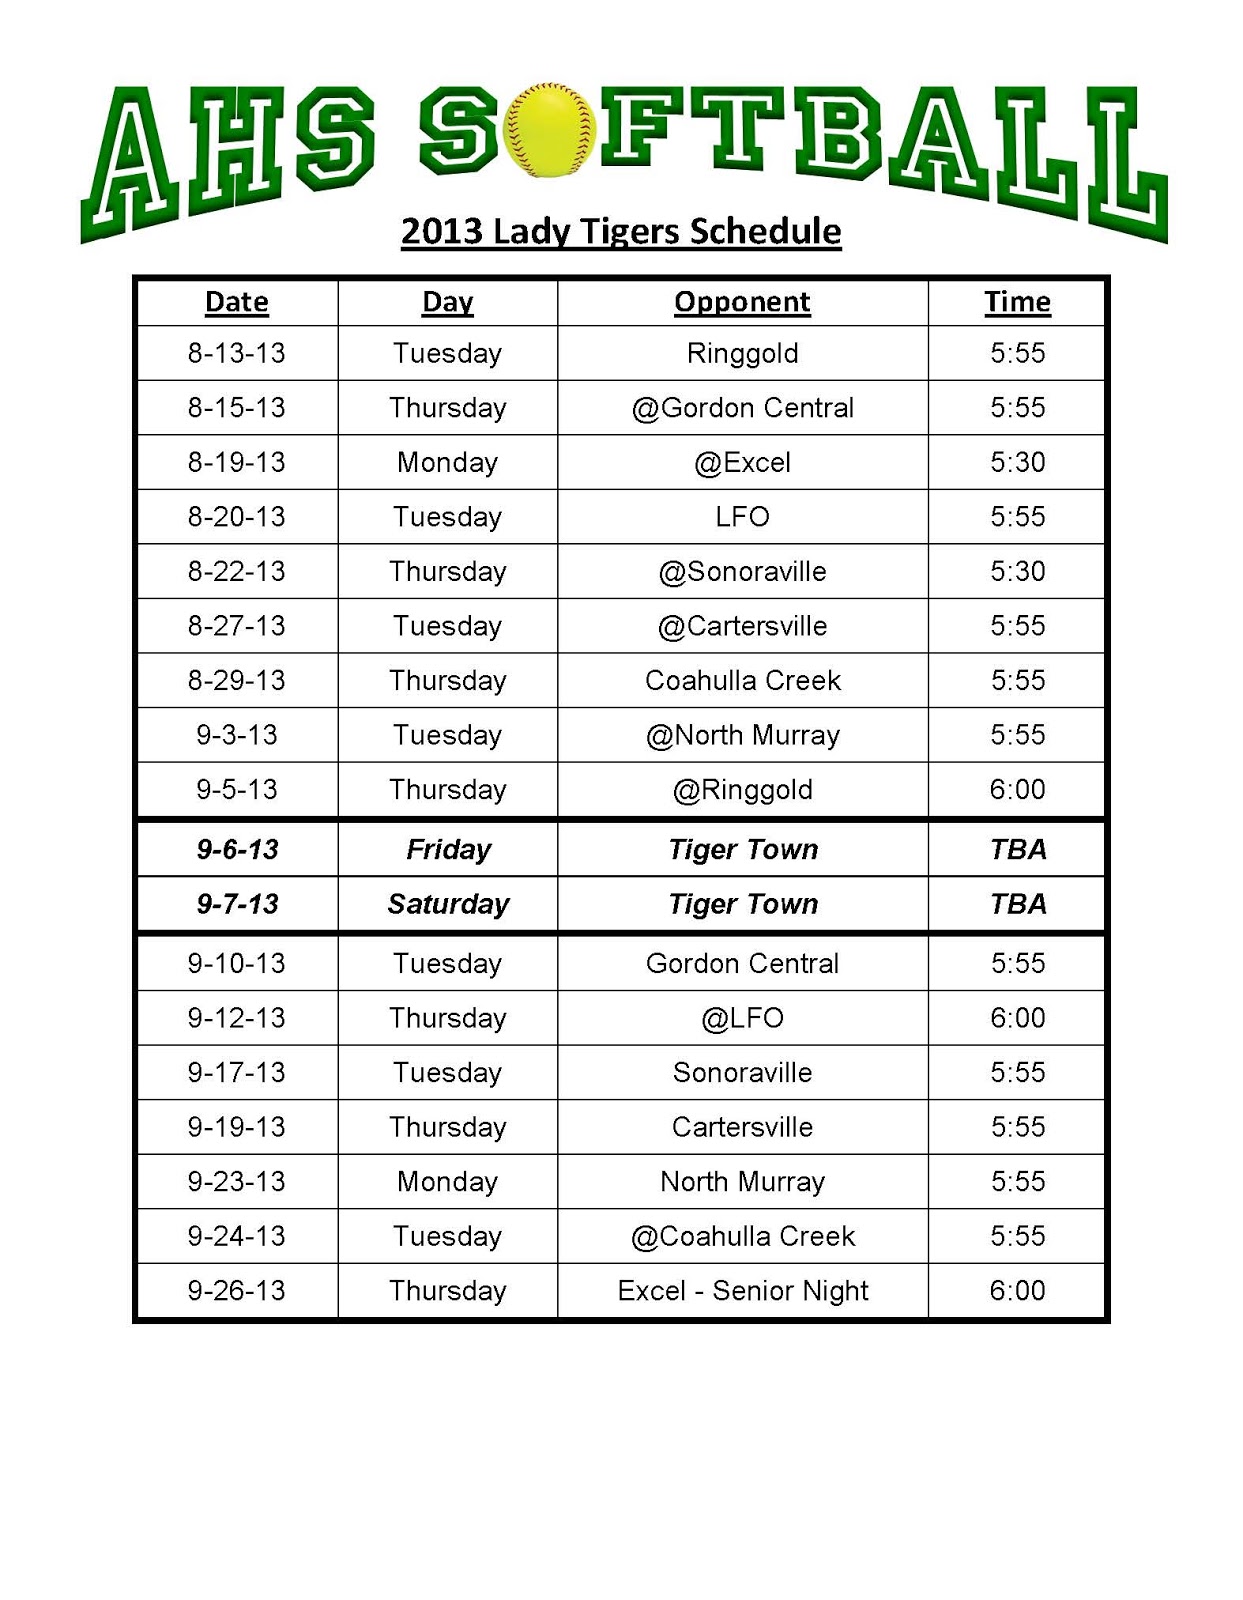 AHS Softball Lady Tigers Game Schedule for 2013